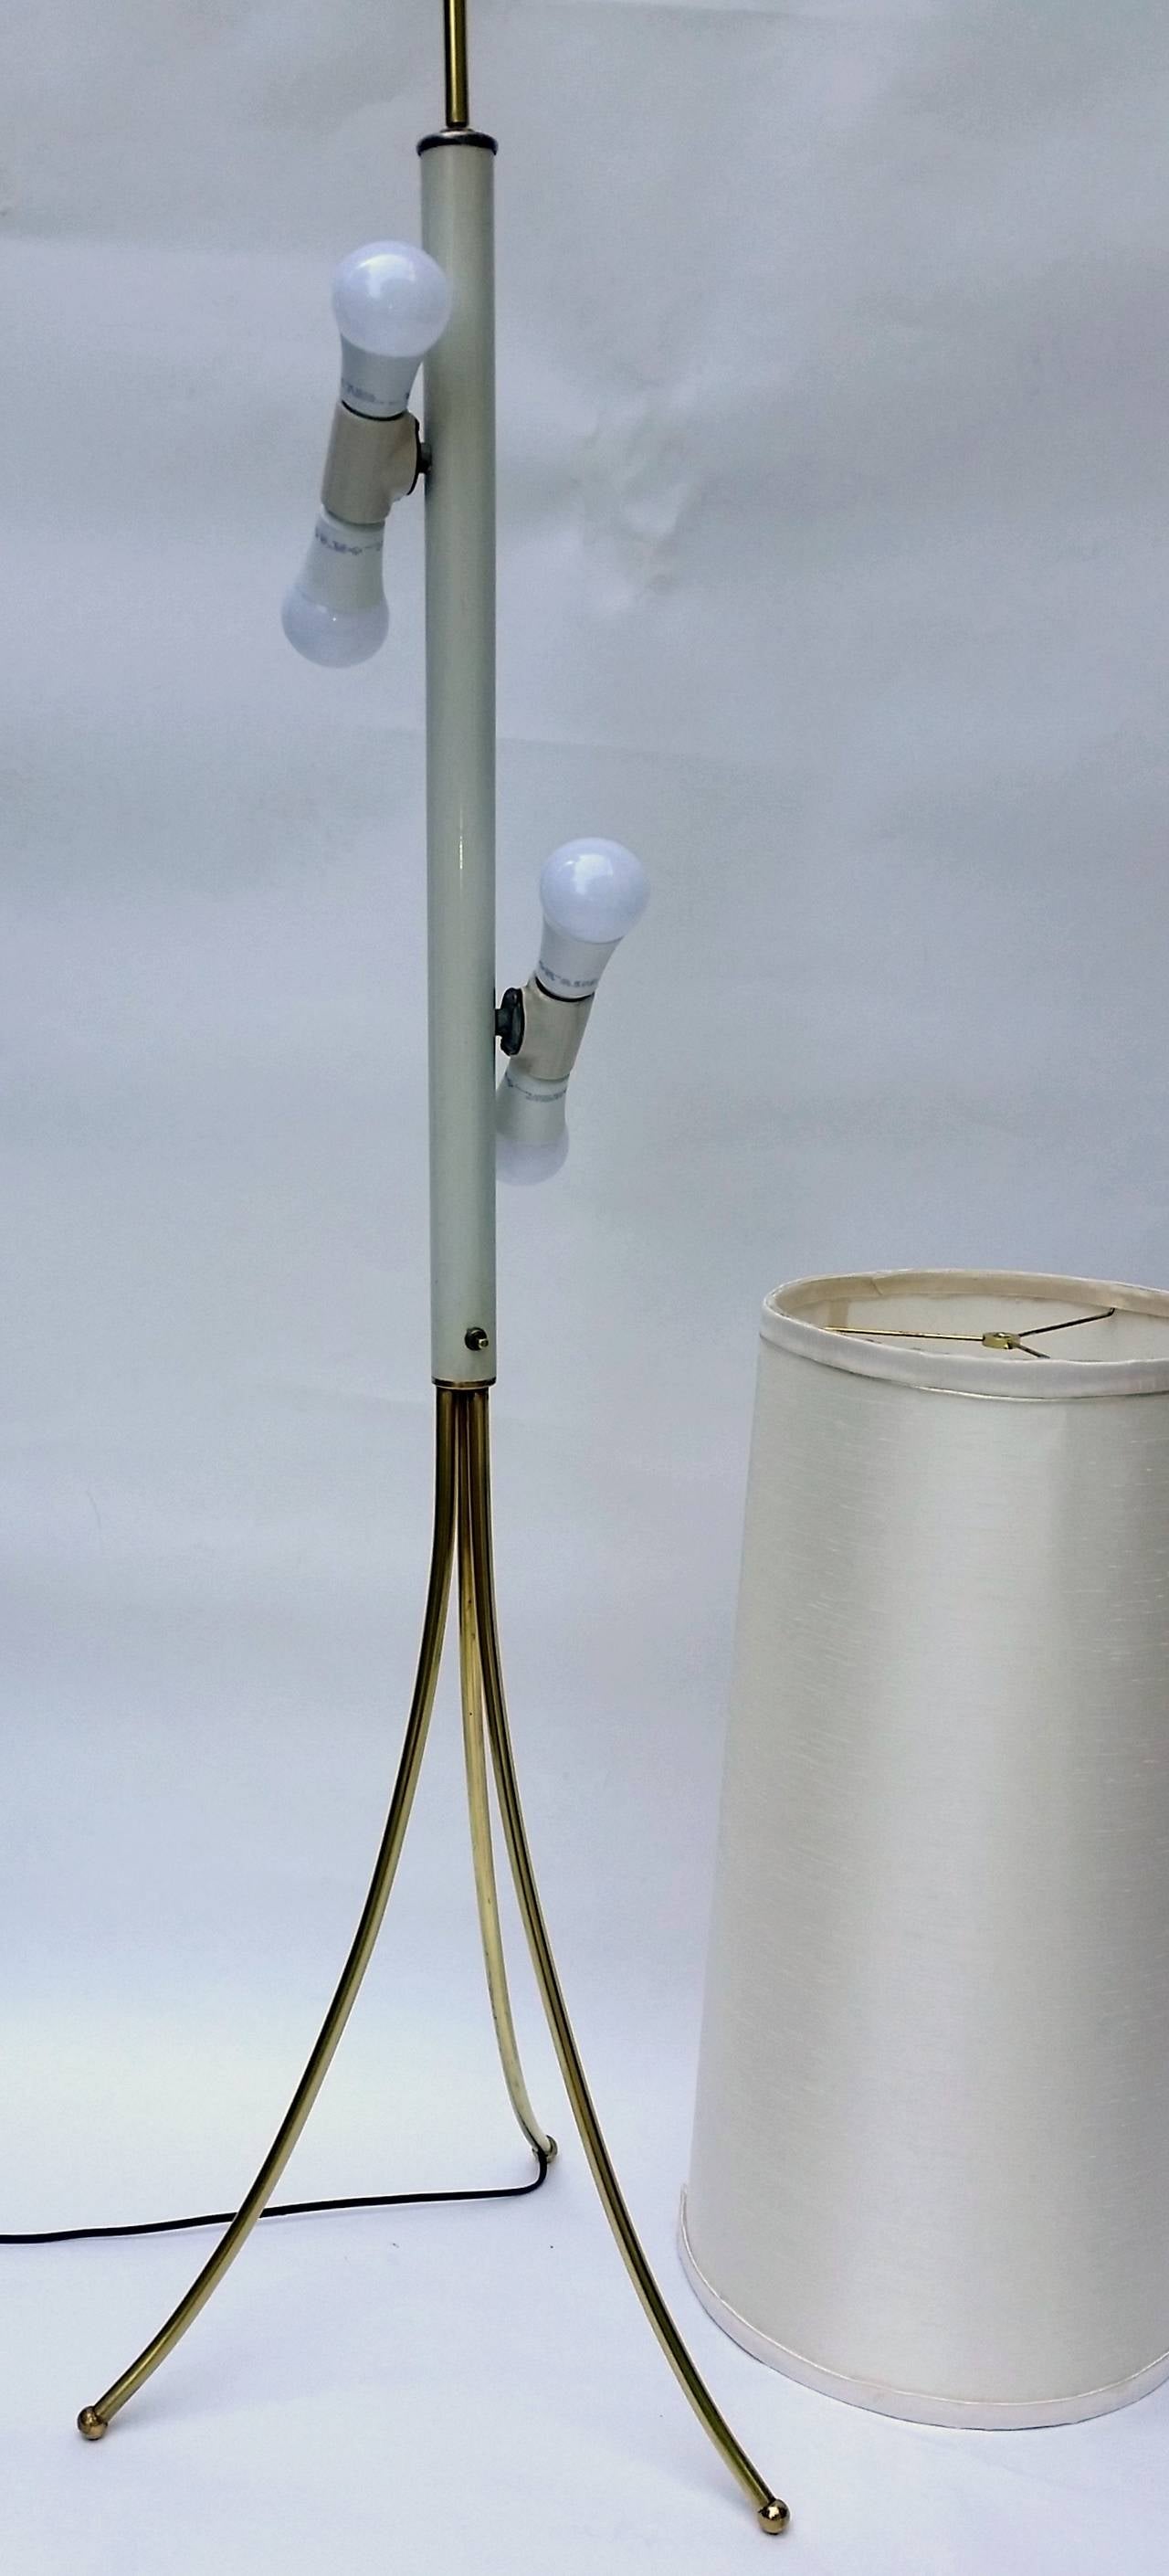 Robsjohn-Gibbings style floor lamp manufactured in Chicago in the early 1950s.

The lamp is in excellent condition.